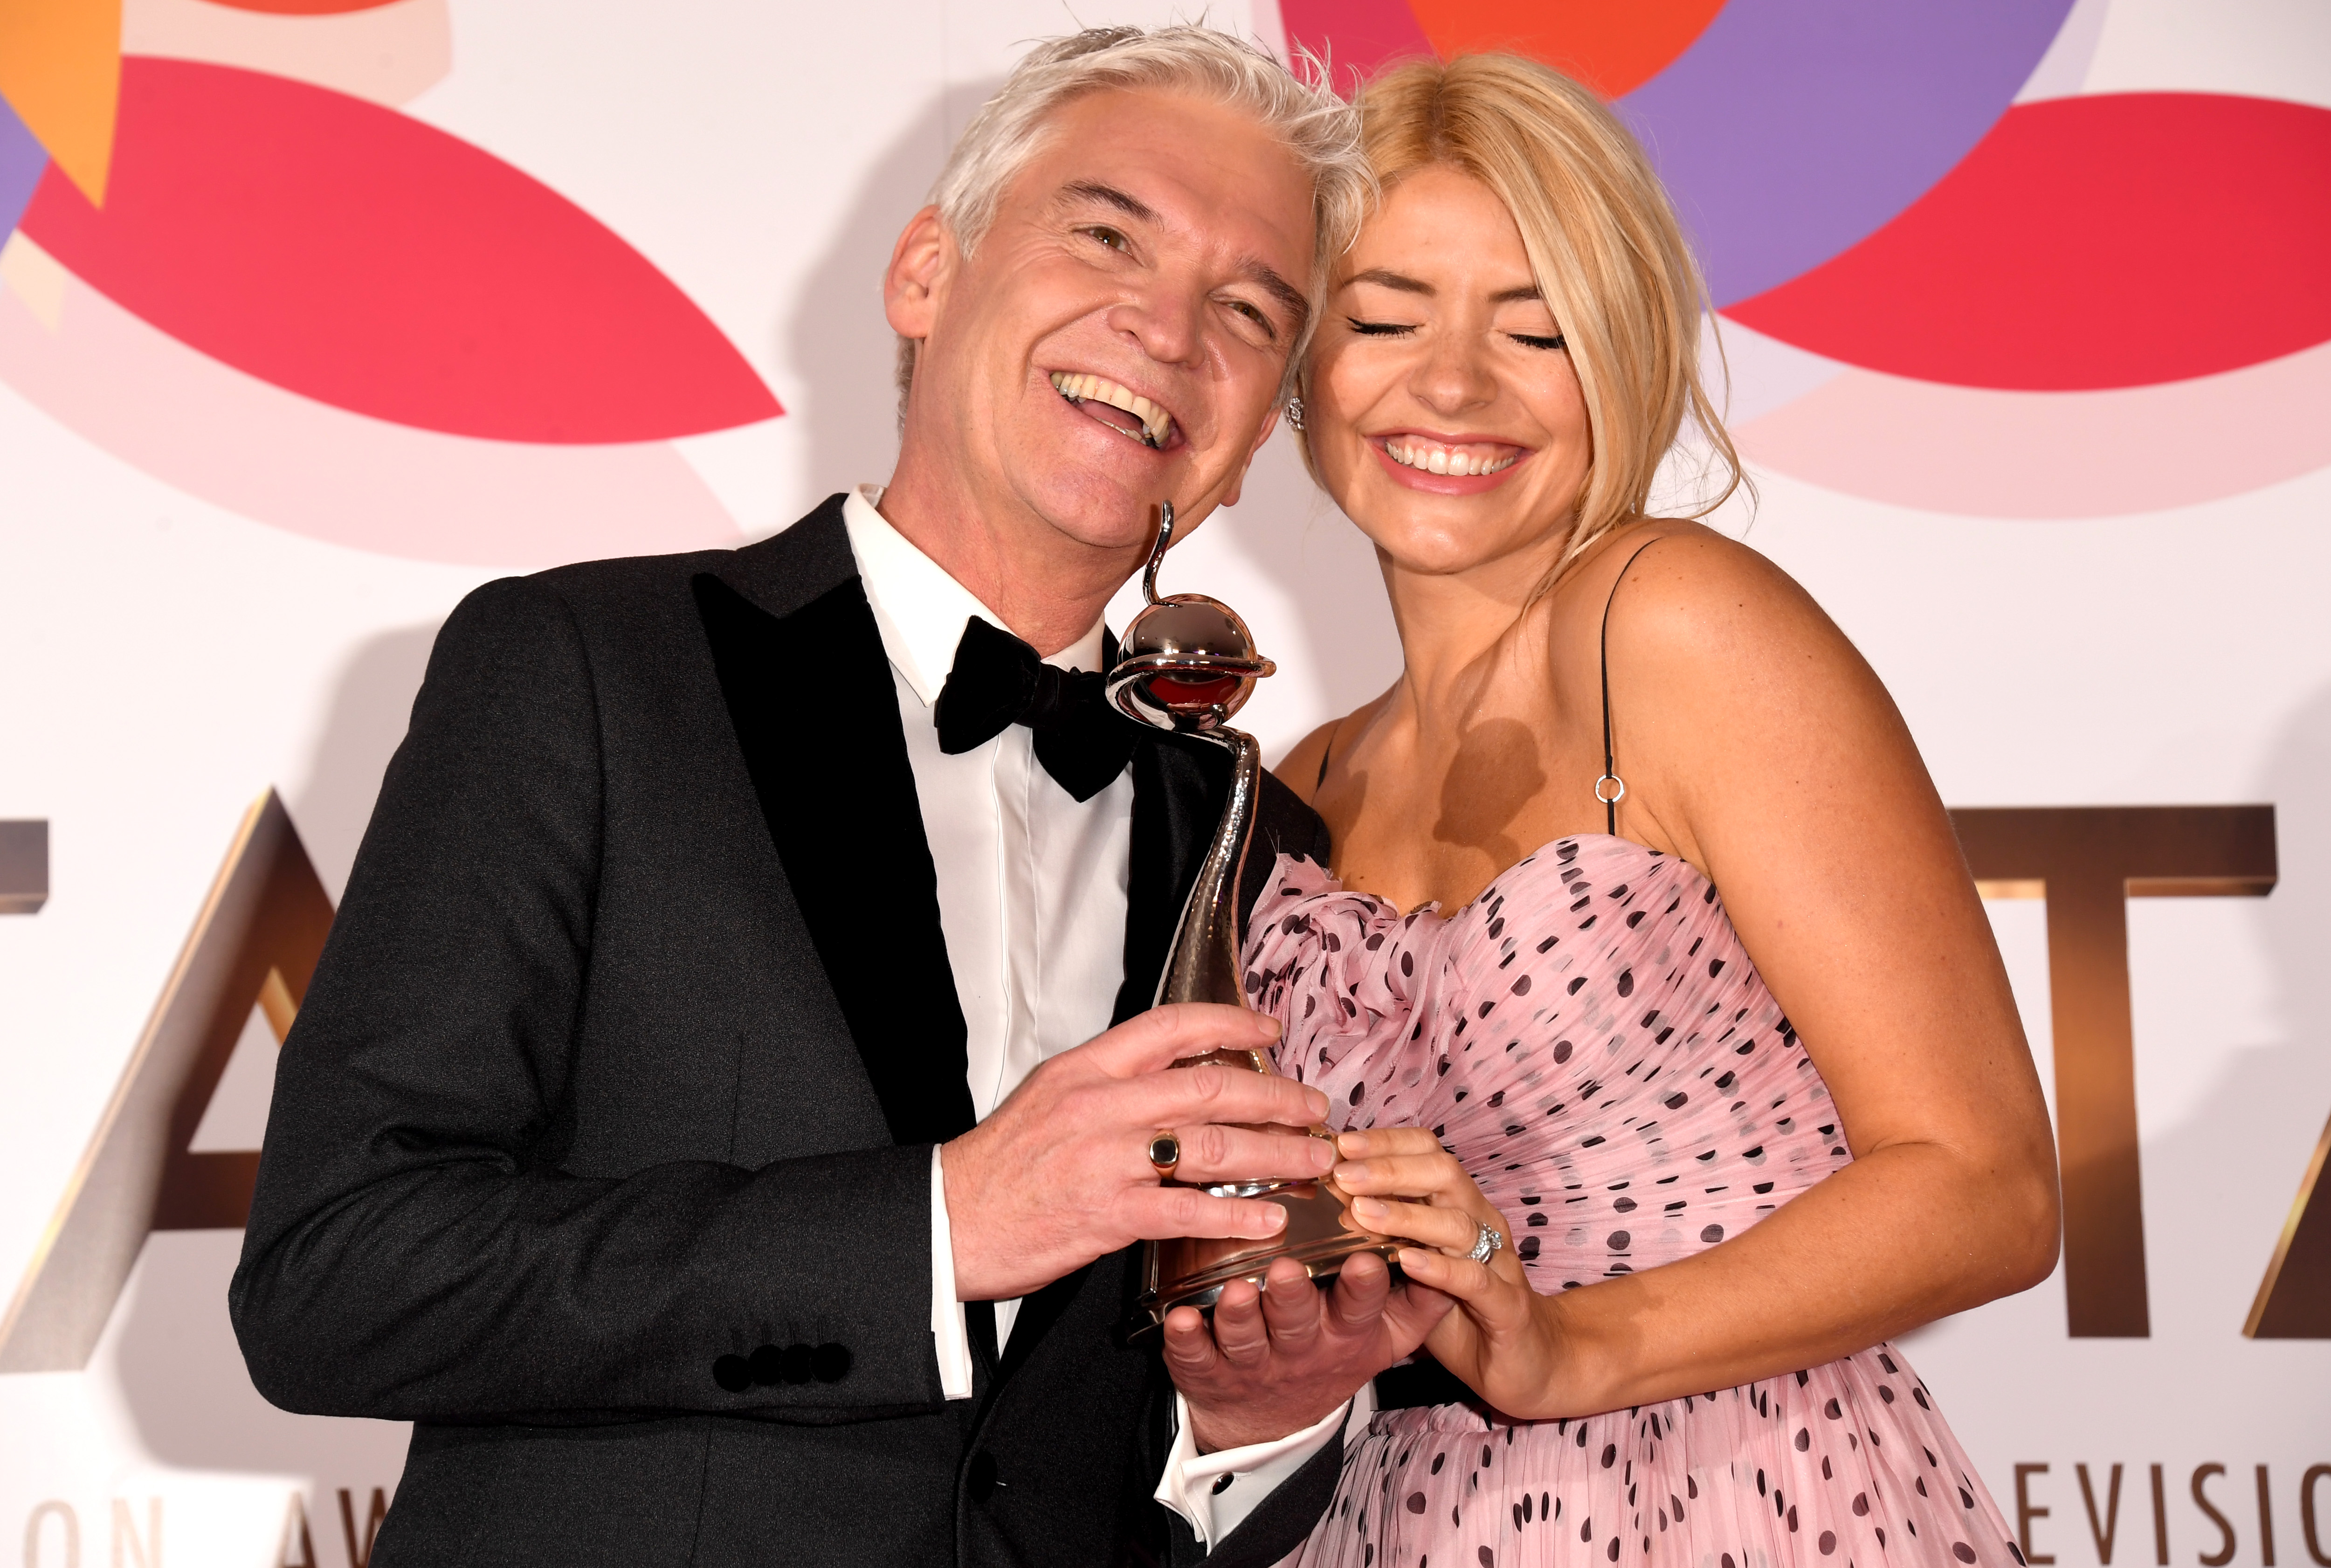 Philip Schofield and Holly Willoughby with the award for Best Daytime TV programme for This Morning.